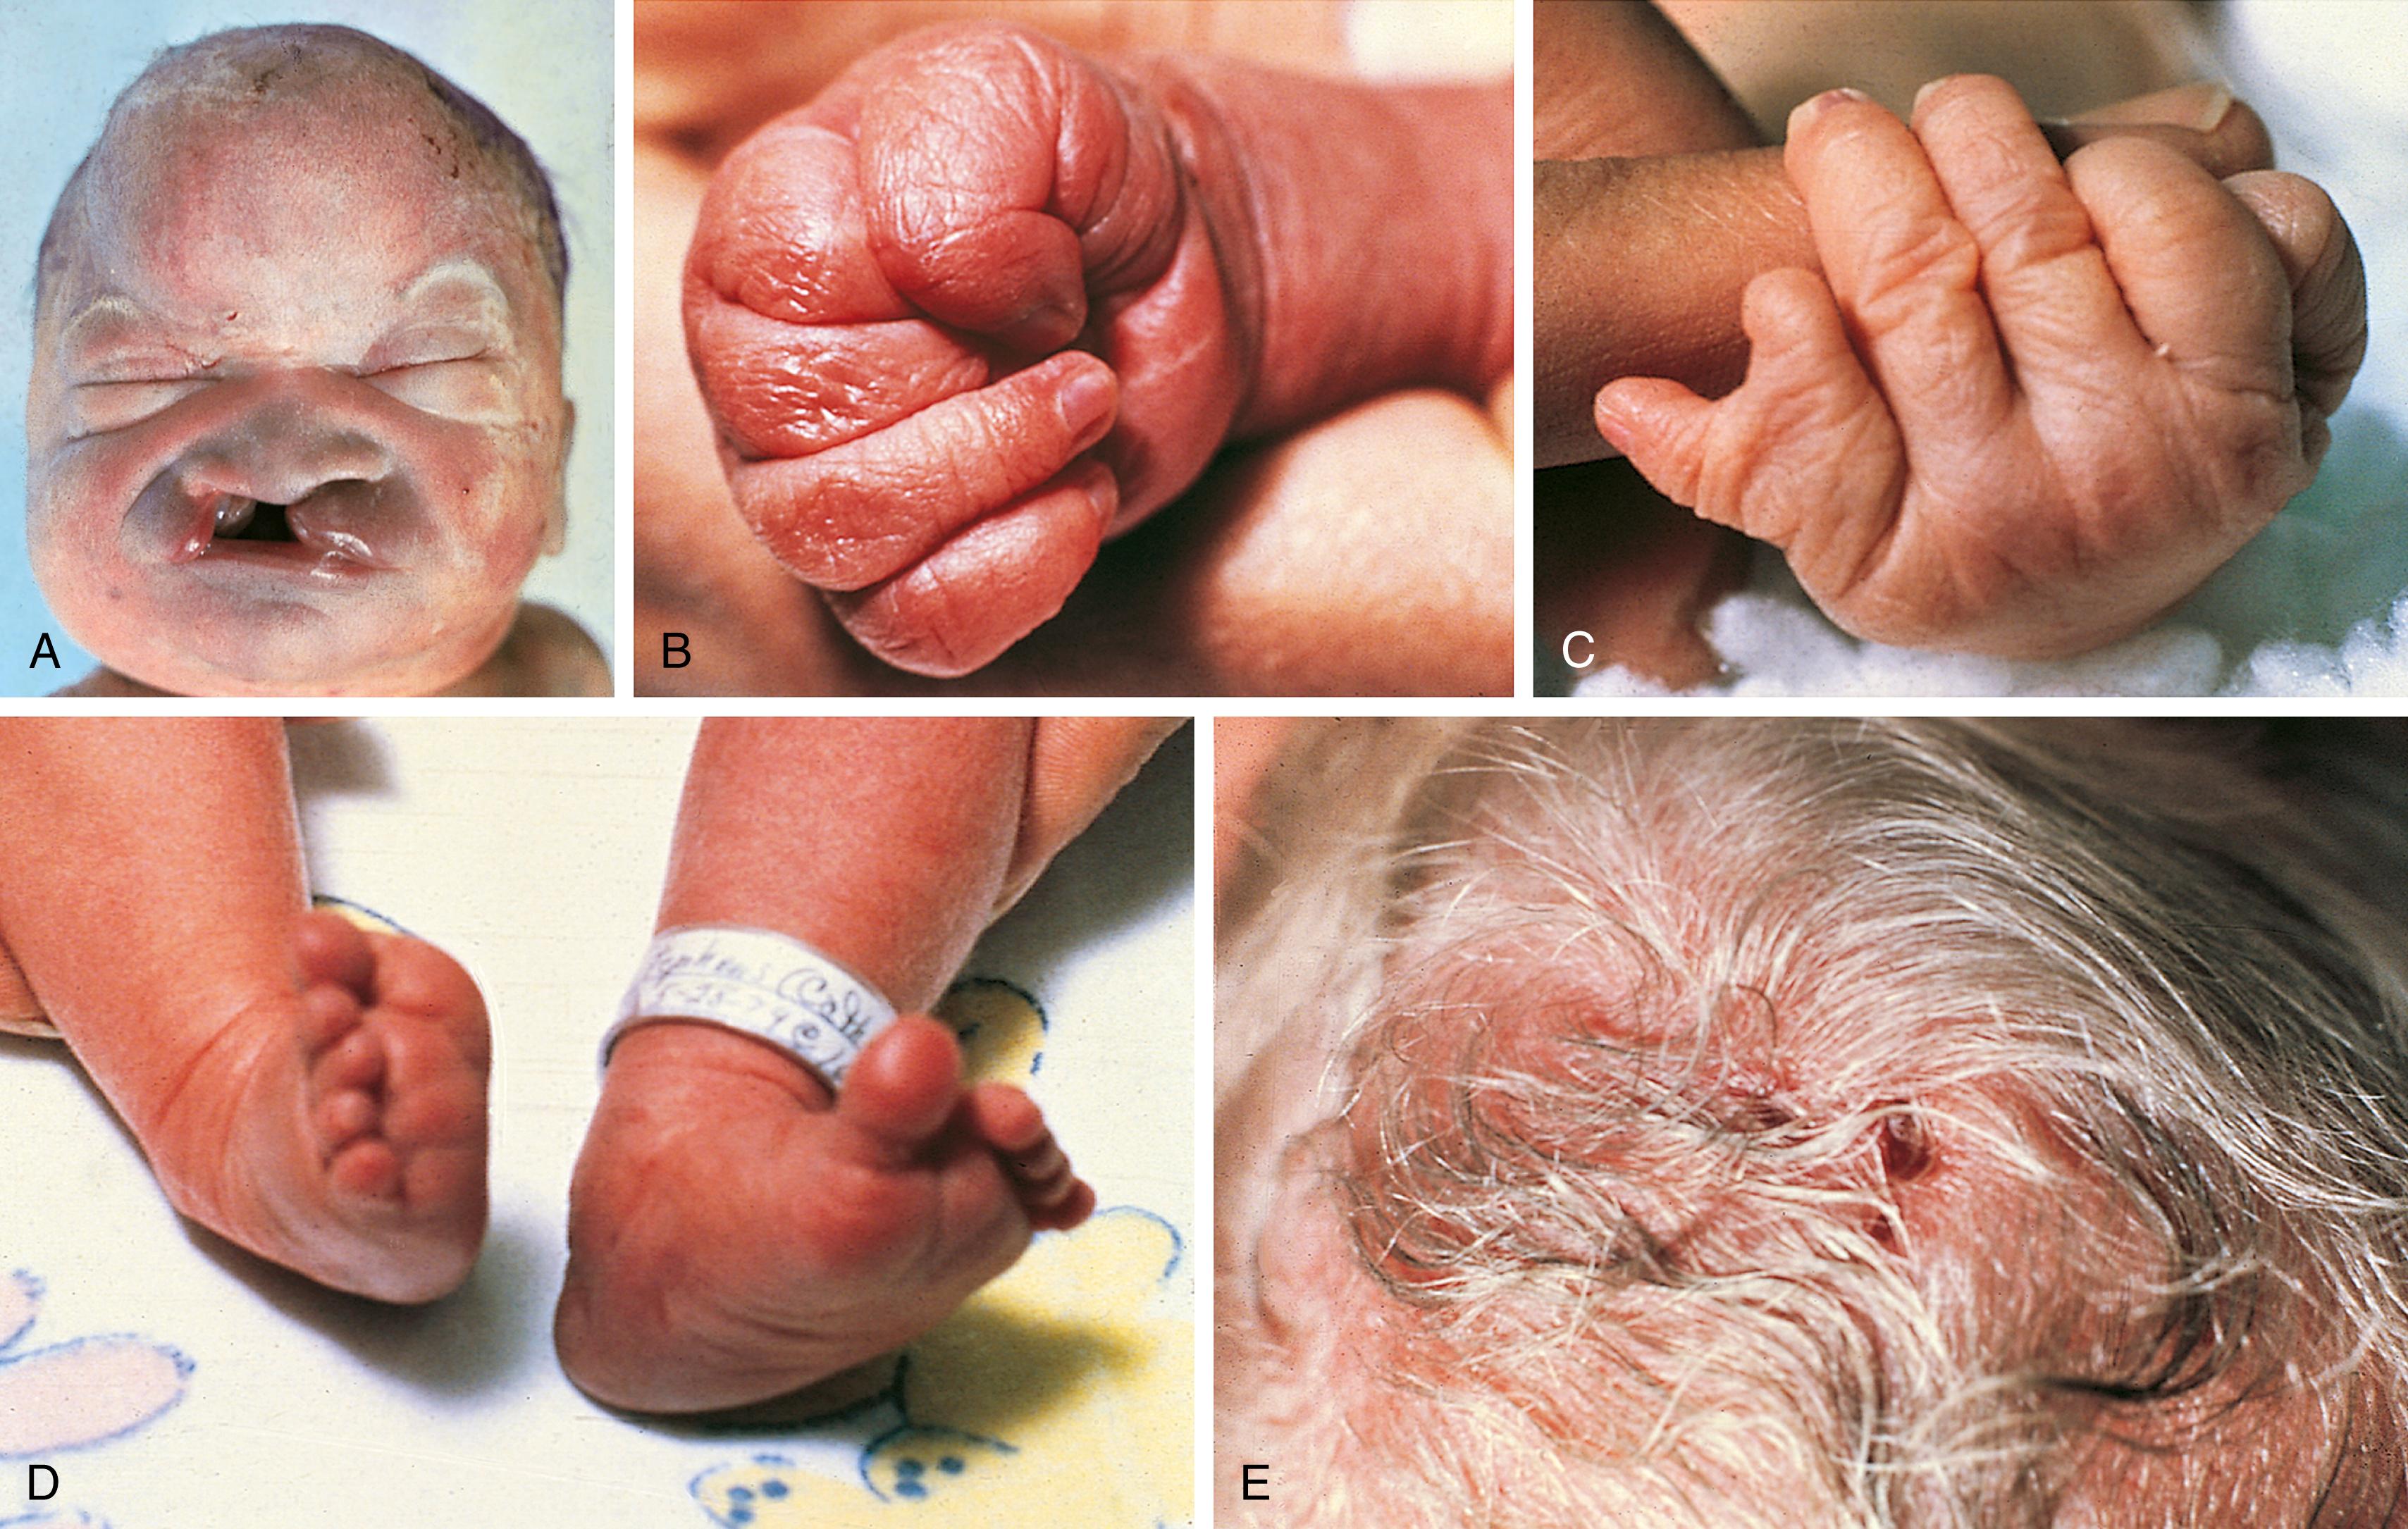 Fig. 1.16, Several physical manifestations of trisomy 13. (A) Facies showing midline defect. (B) Clenched hand with overlapping fingers. (C) Postaxial polydactyly. (D) Equinovarus deformity. (E) Typical punched-out scalp lesions of aplasia cutis congenita.